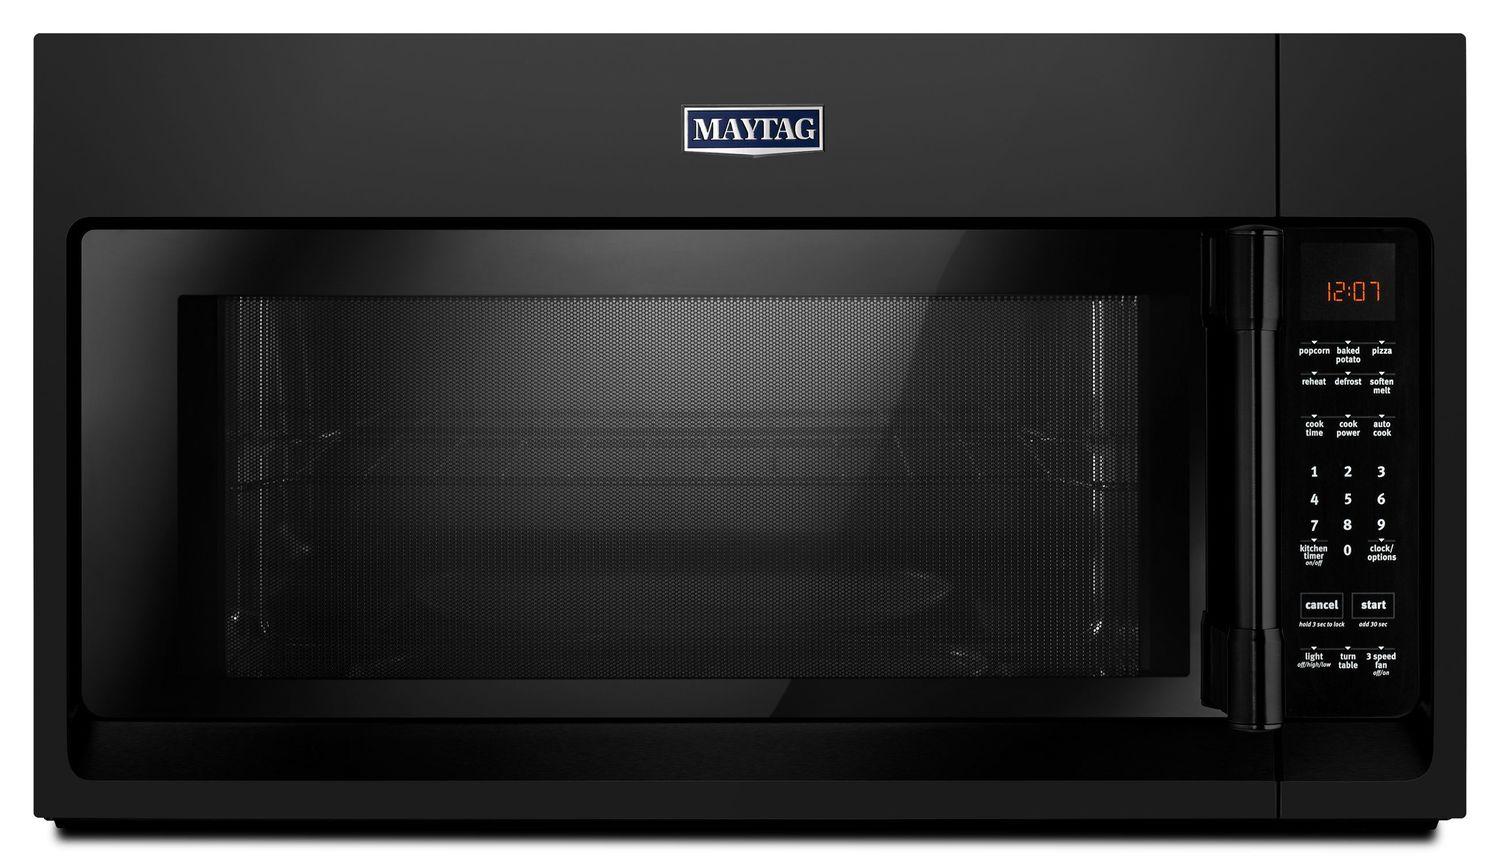 Maytag Over-The-Range Microwave With Interior Cooking Rack - 2.0 Cu. Ft. Black